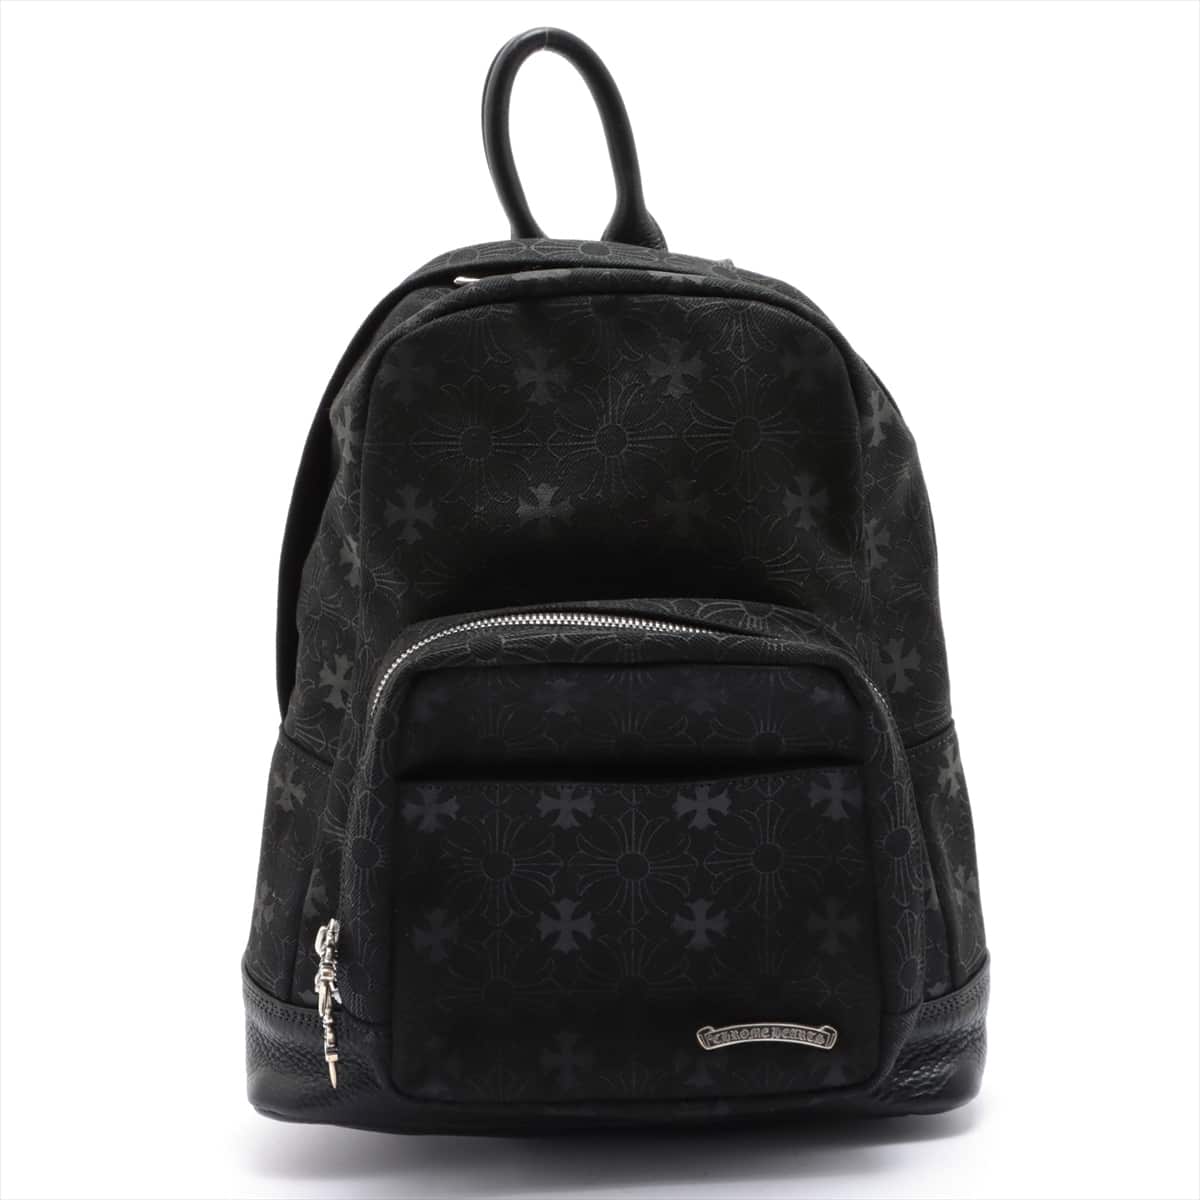 Chrome Hearts 7th grade mini Backpack Cotton & Peather With invoice